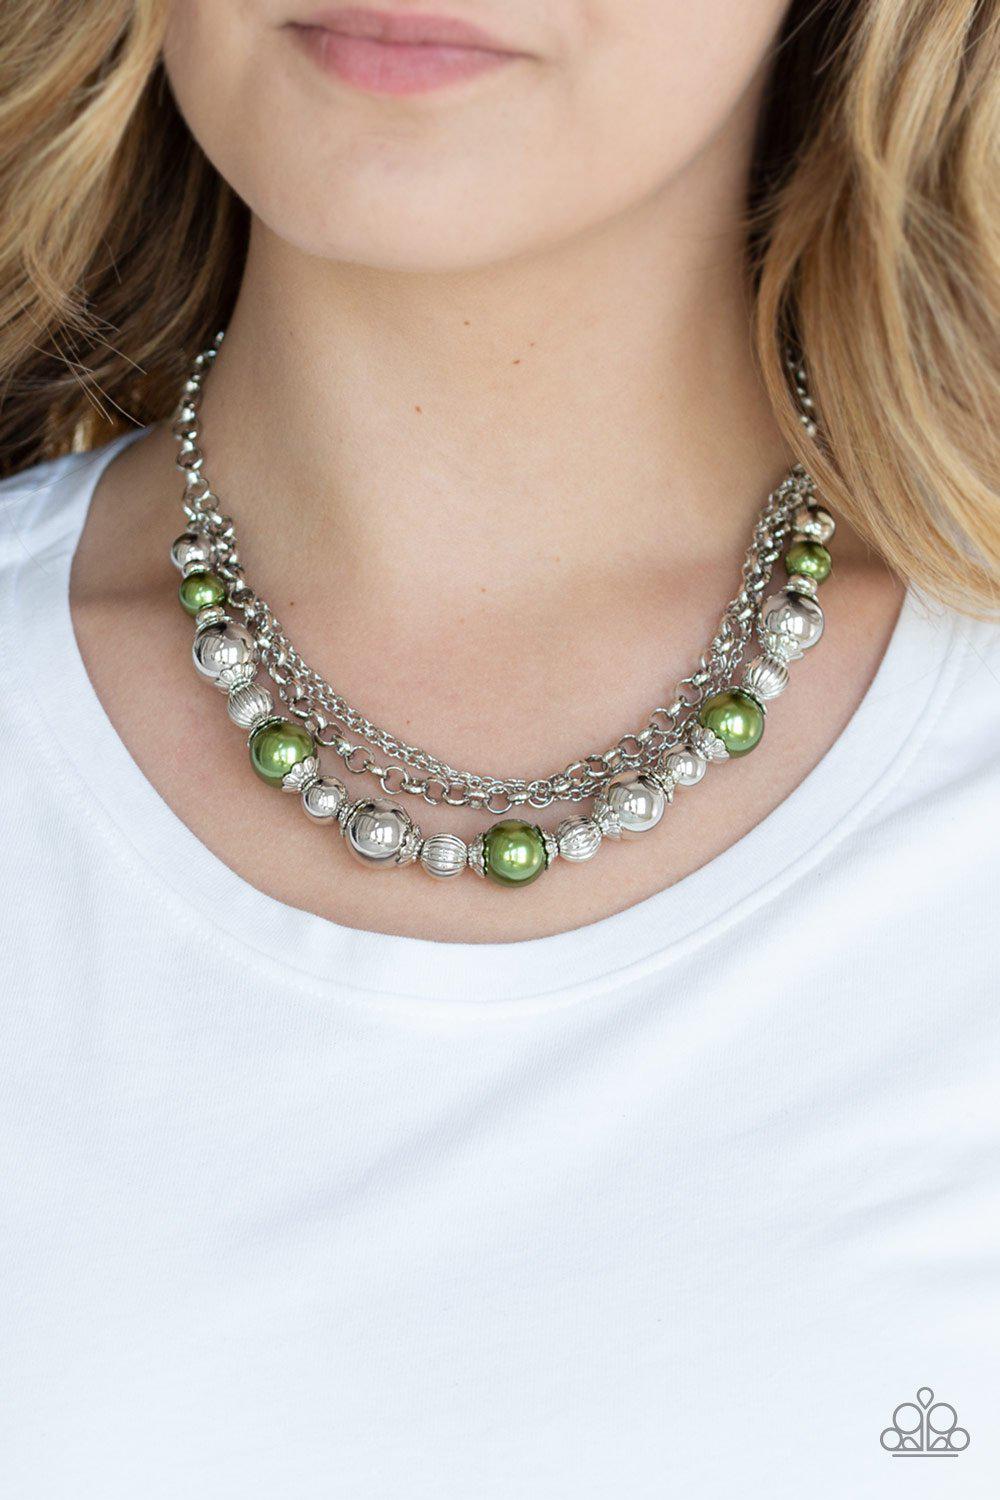 5th Avenue Romance Green and Silver Necklace - Paparazzi Accessories-CarasShop.com - $5 Jewelry by Cara Jewels